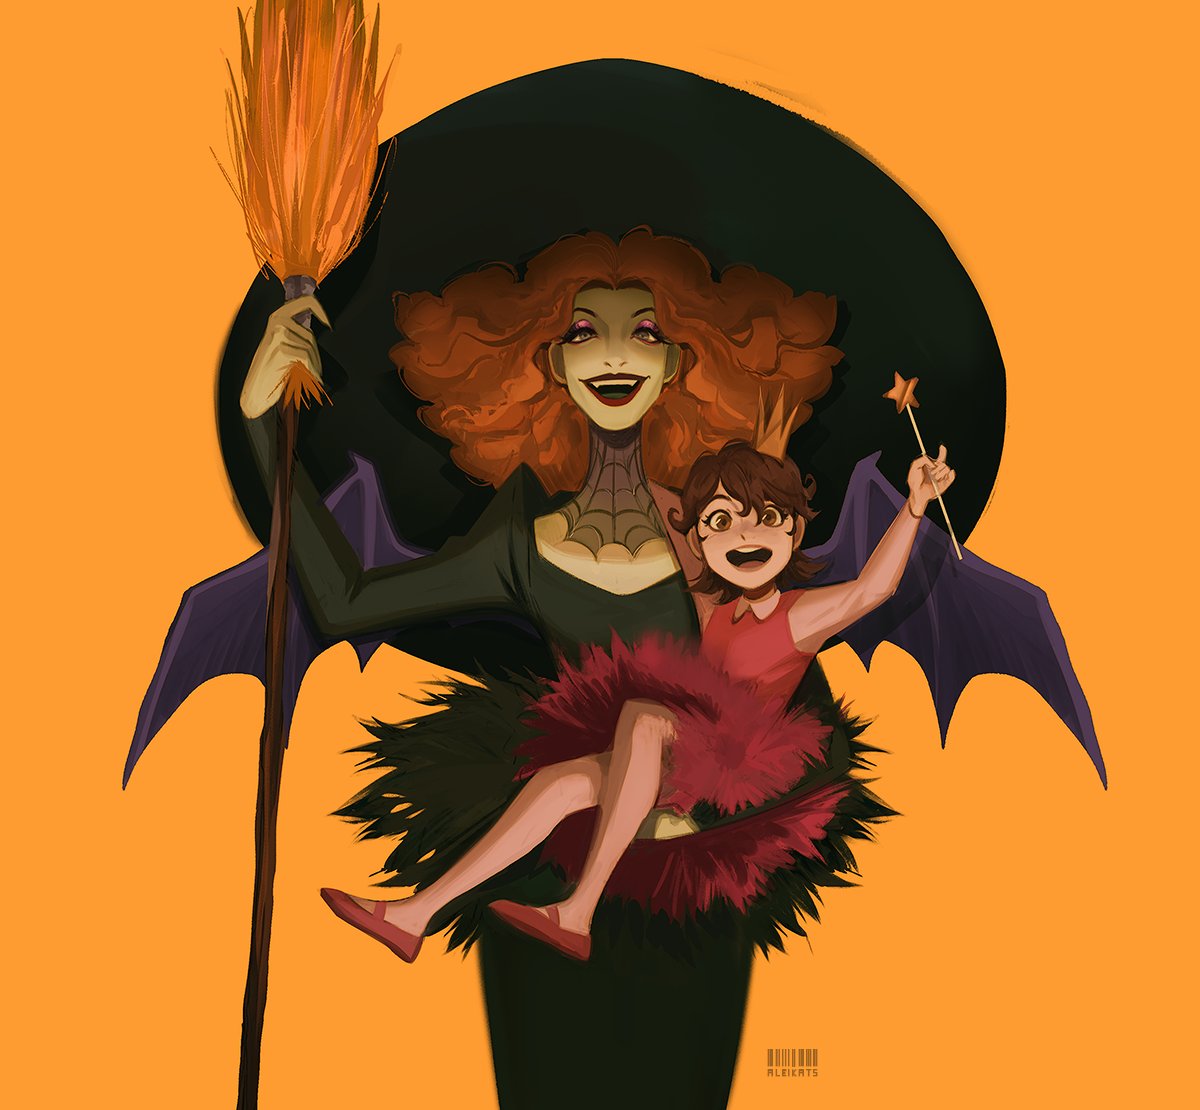 19.7K. 🧙 ♀. 🧚 ♀. Spooky greetings from Scary Godmother and Hannah Marie! 